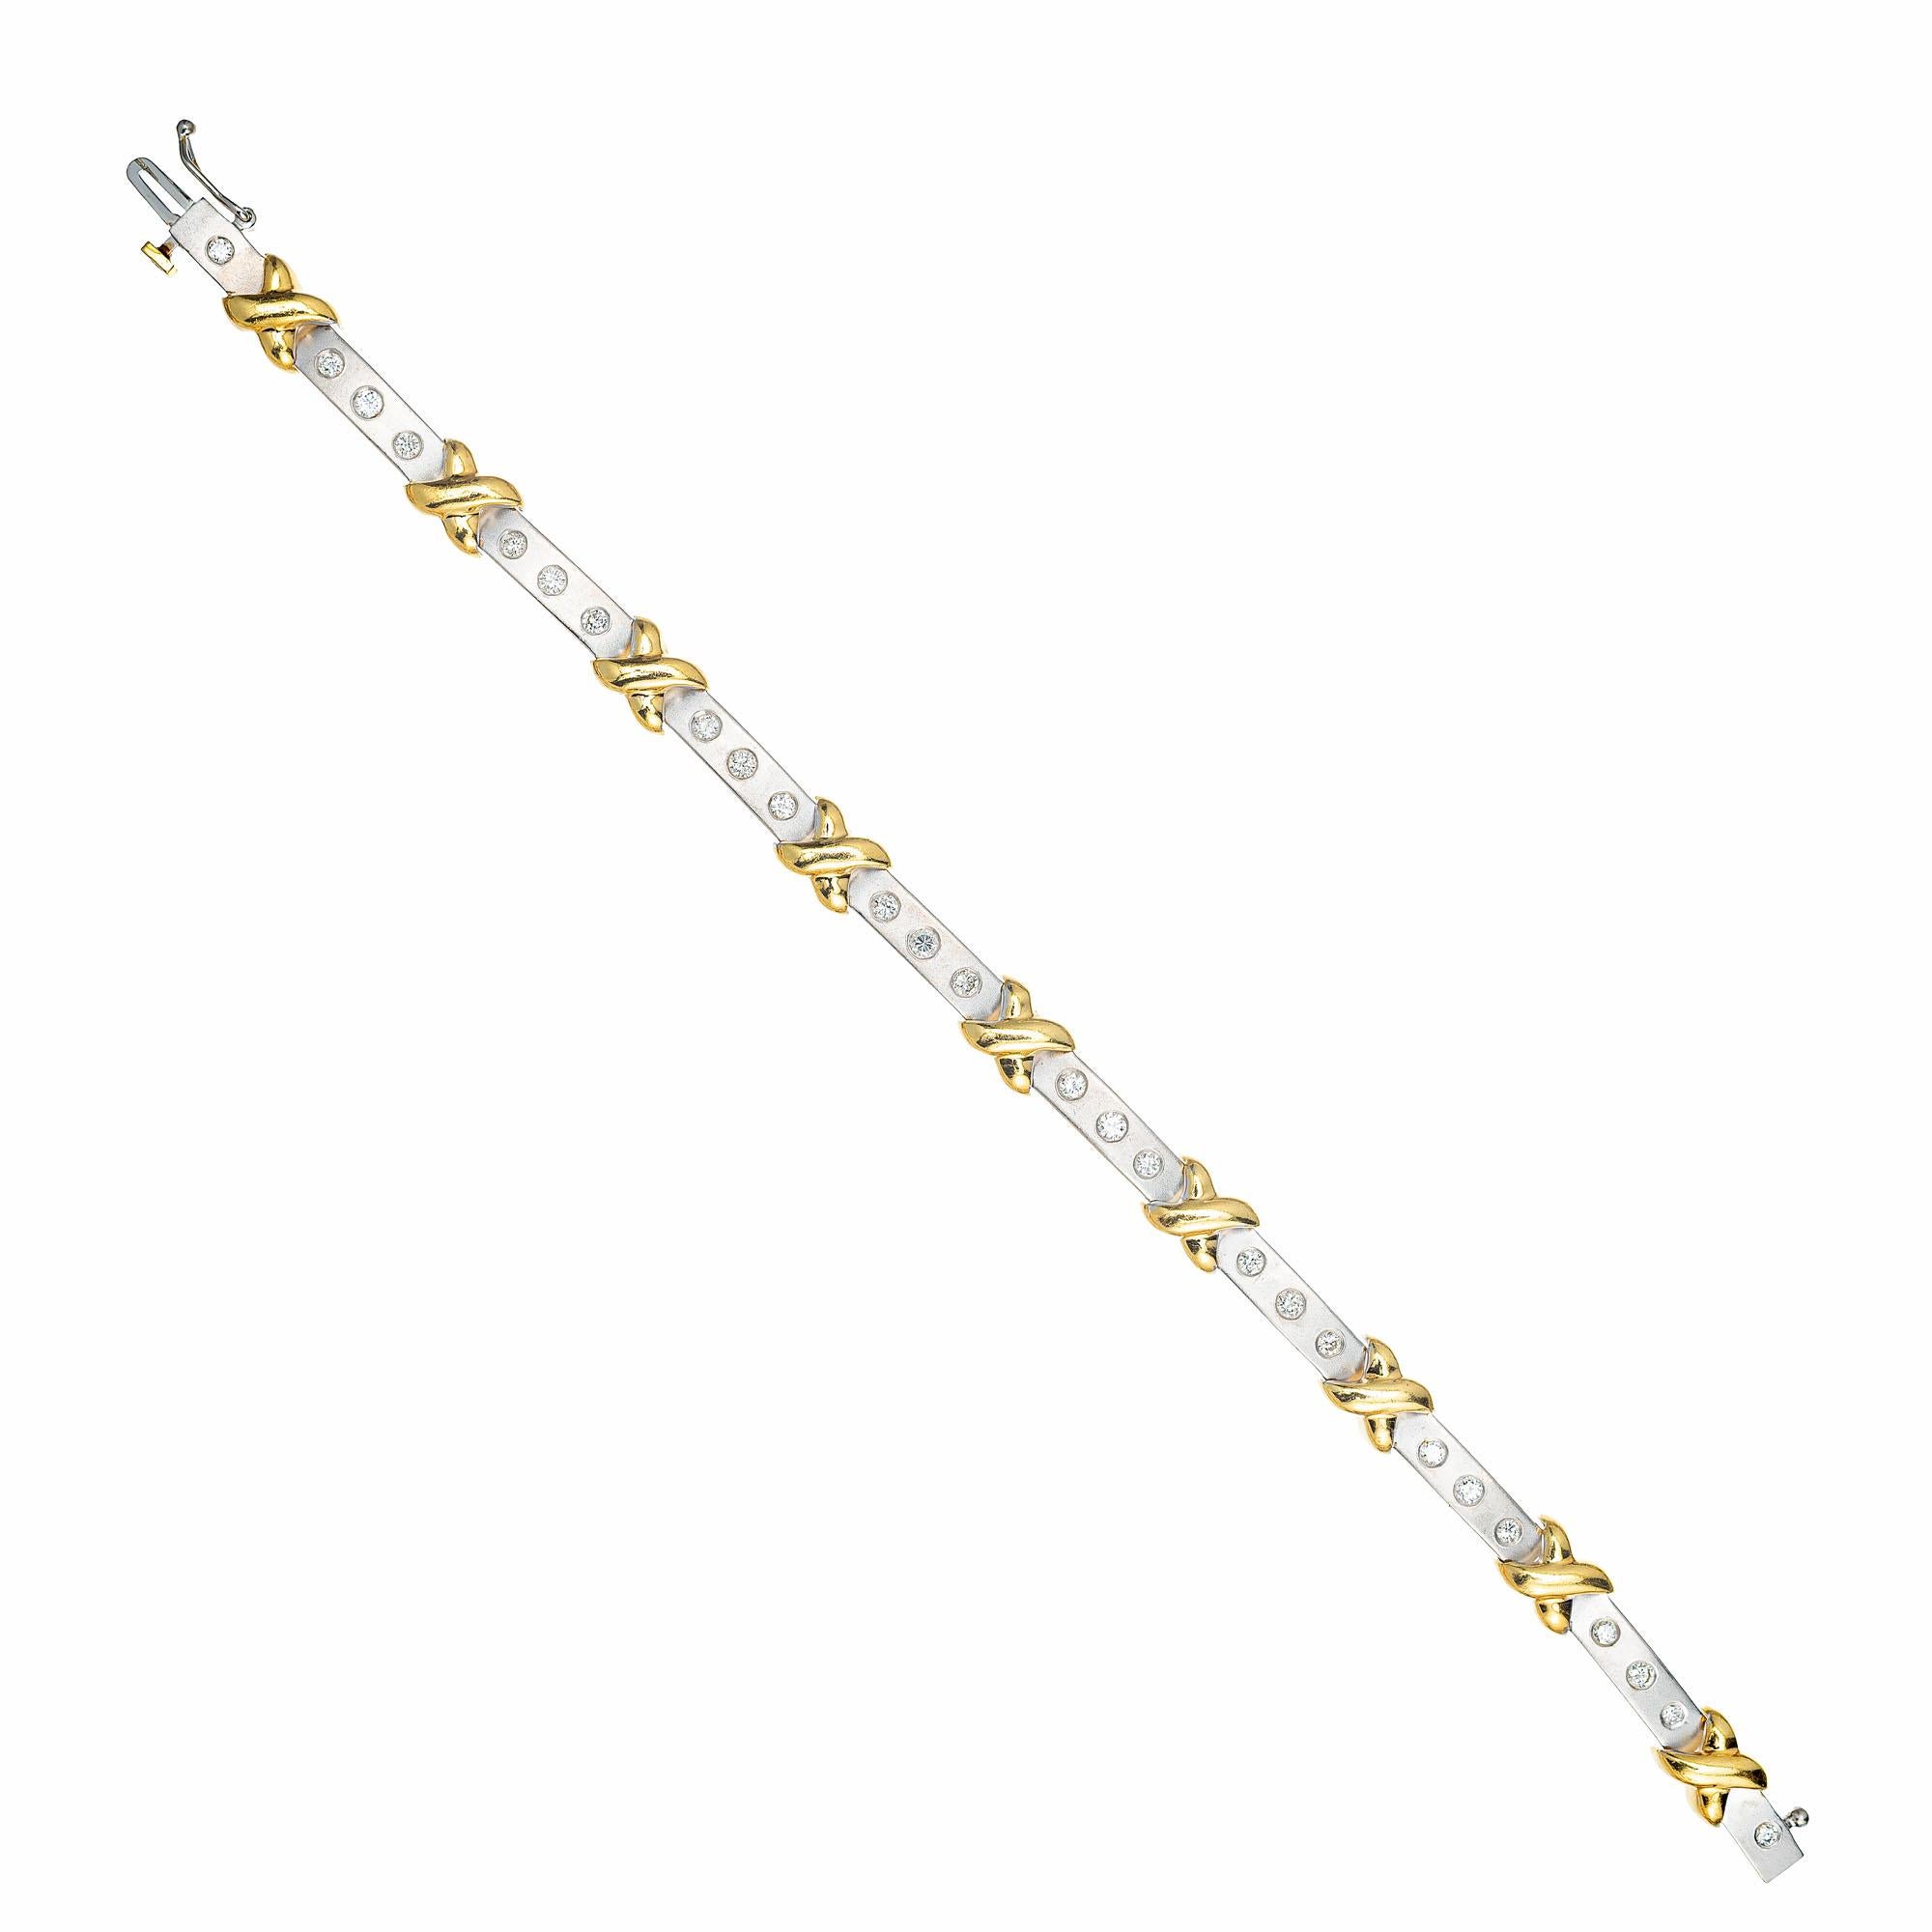 Diamond gold hinged link bracelet. 26 round diamonds in 18k white gold textured bar links with 18k yellow gold 